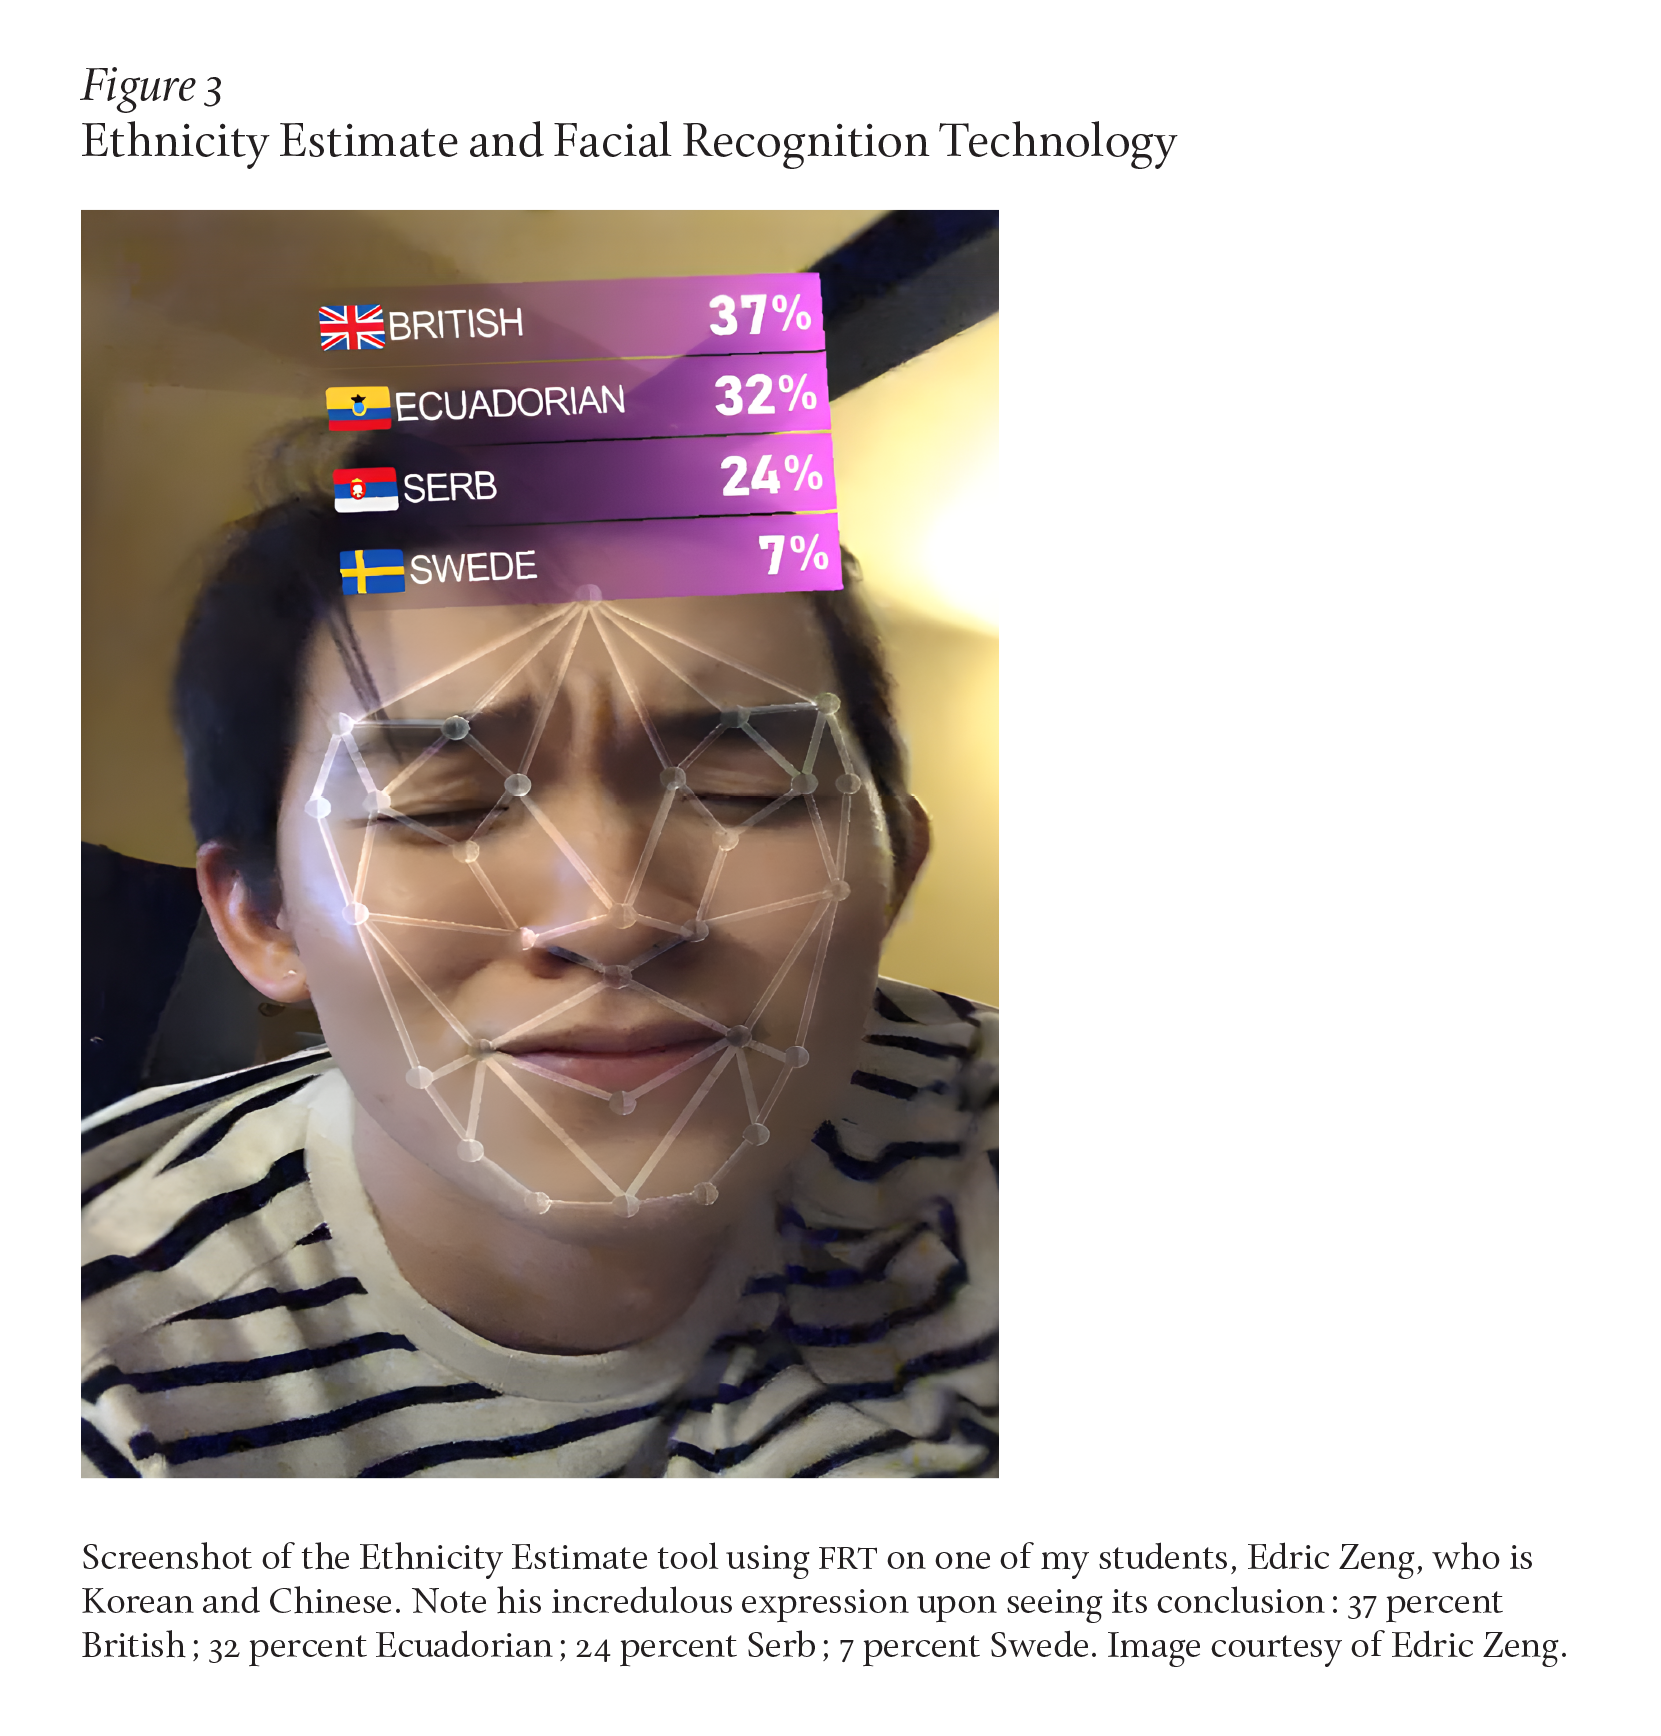 Ethnicity Estimate and Facial Recognition Technology